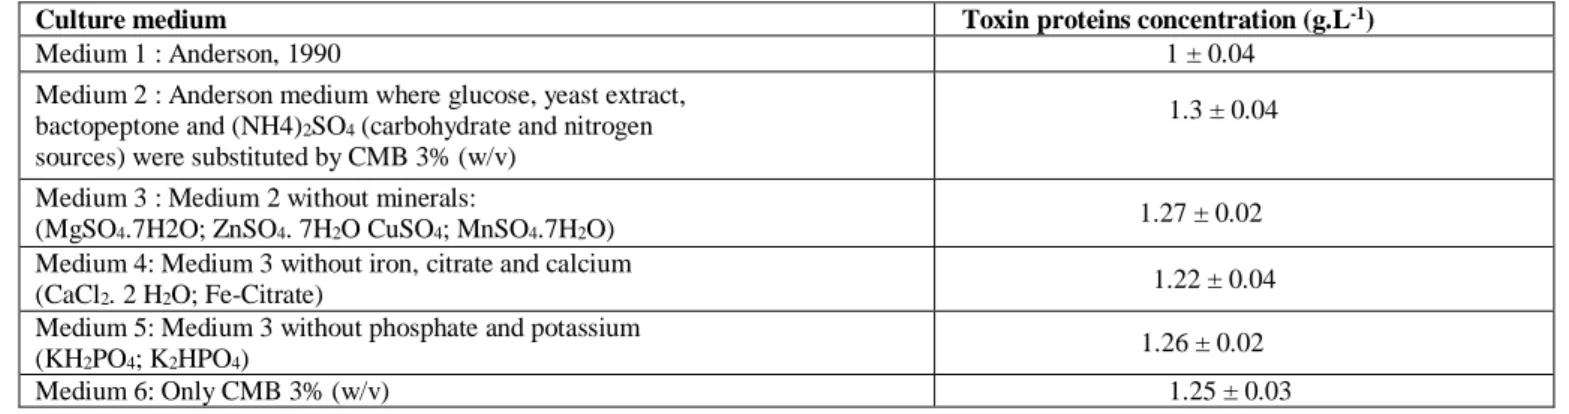 Table 1: Effect of substituting the nutrients of Anderson medium by CMB 3% (w/v) on toxin proteins production